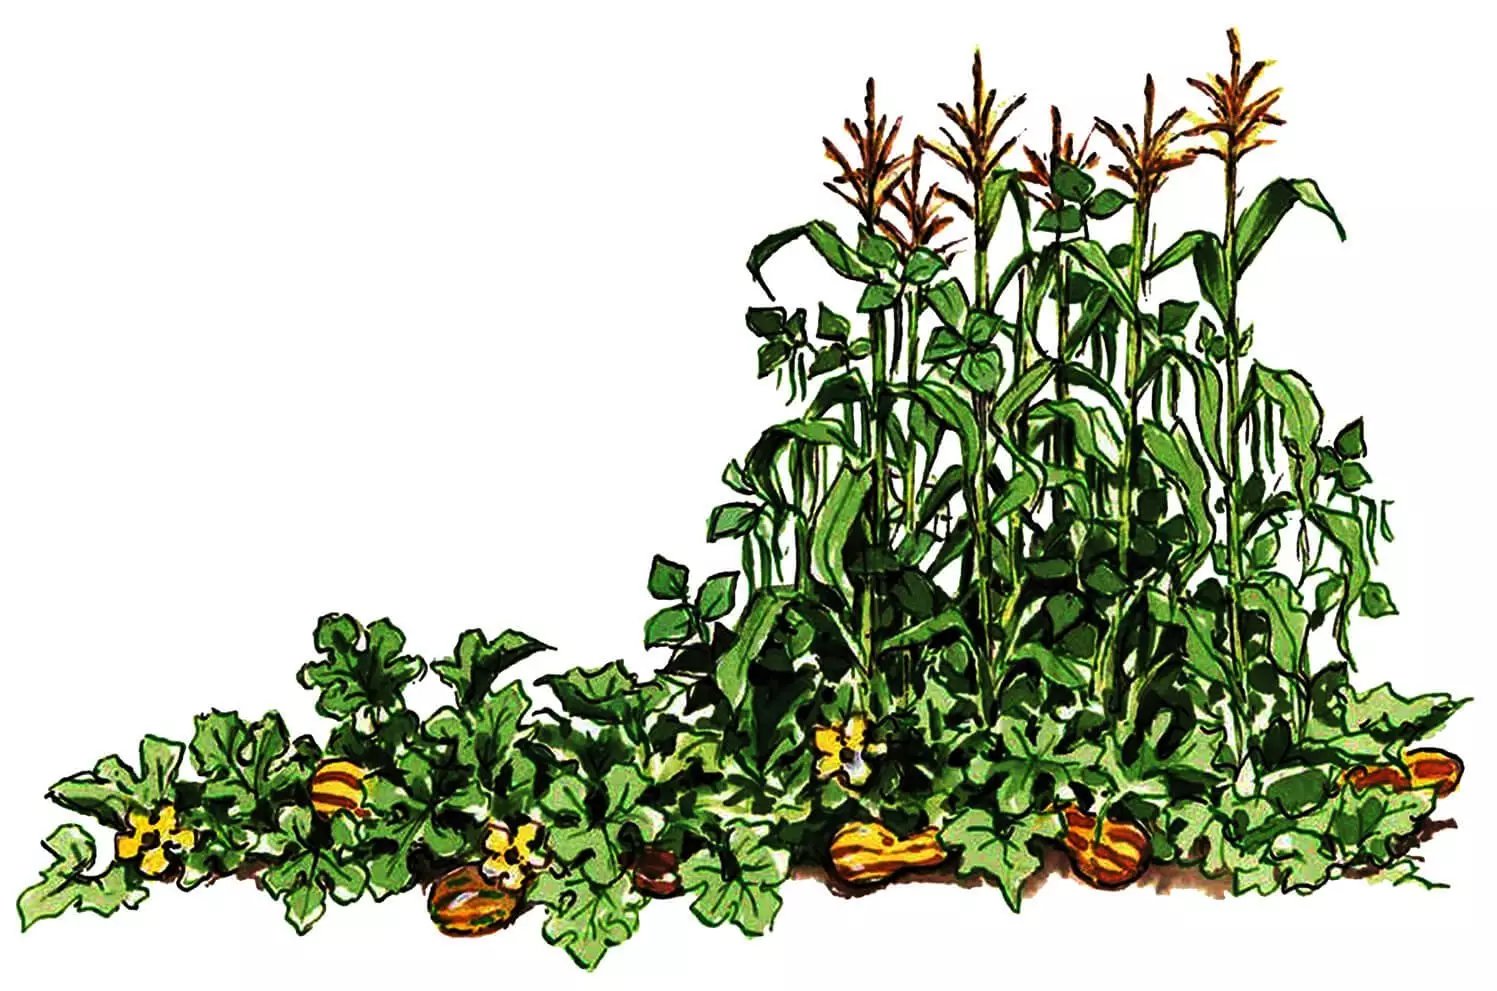 Color illustration of corns, beans, and squash plants growing together.